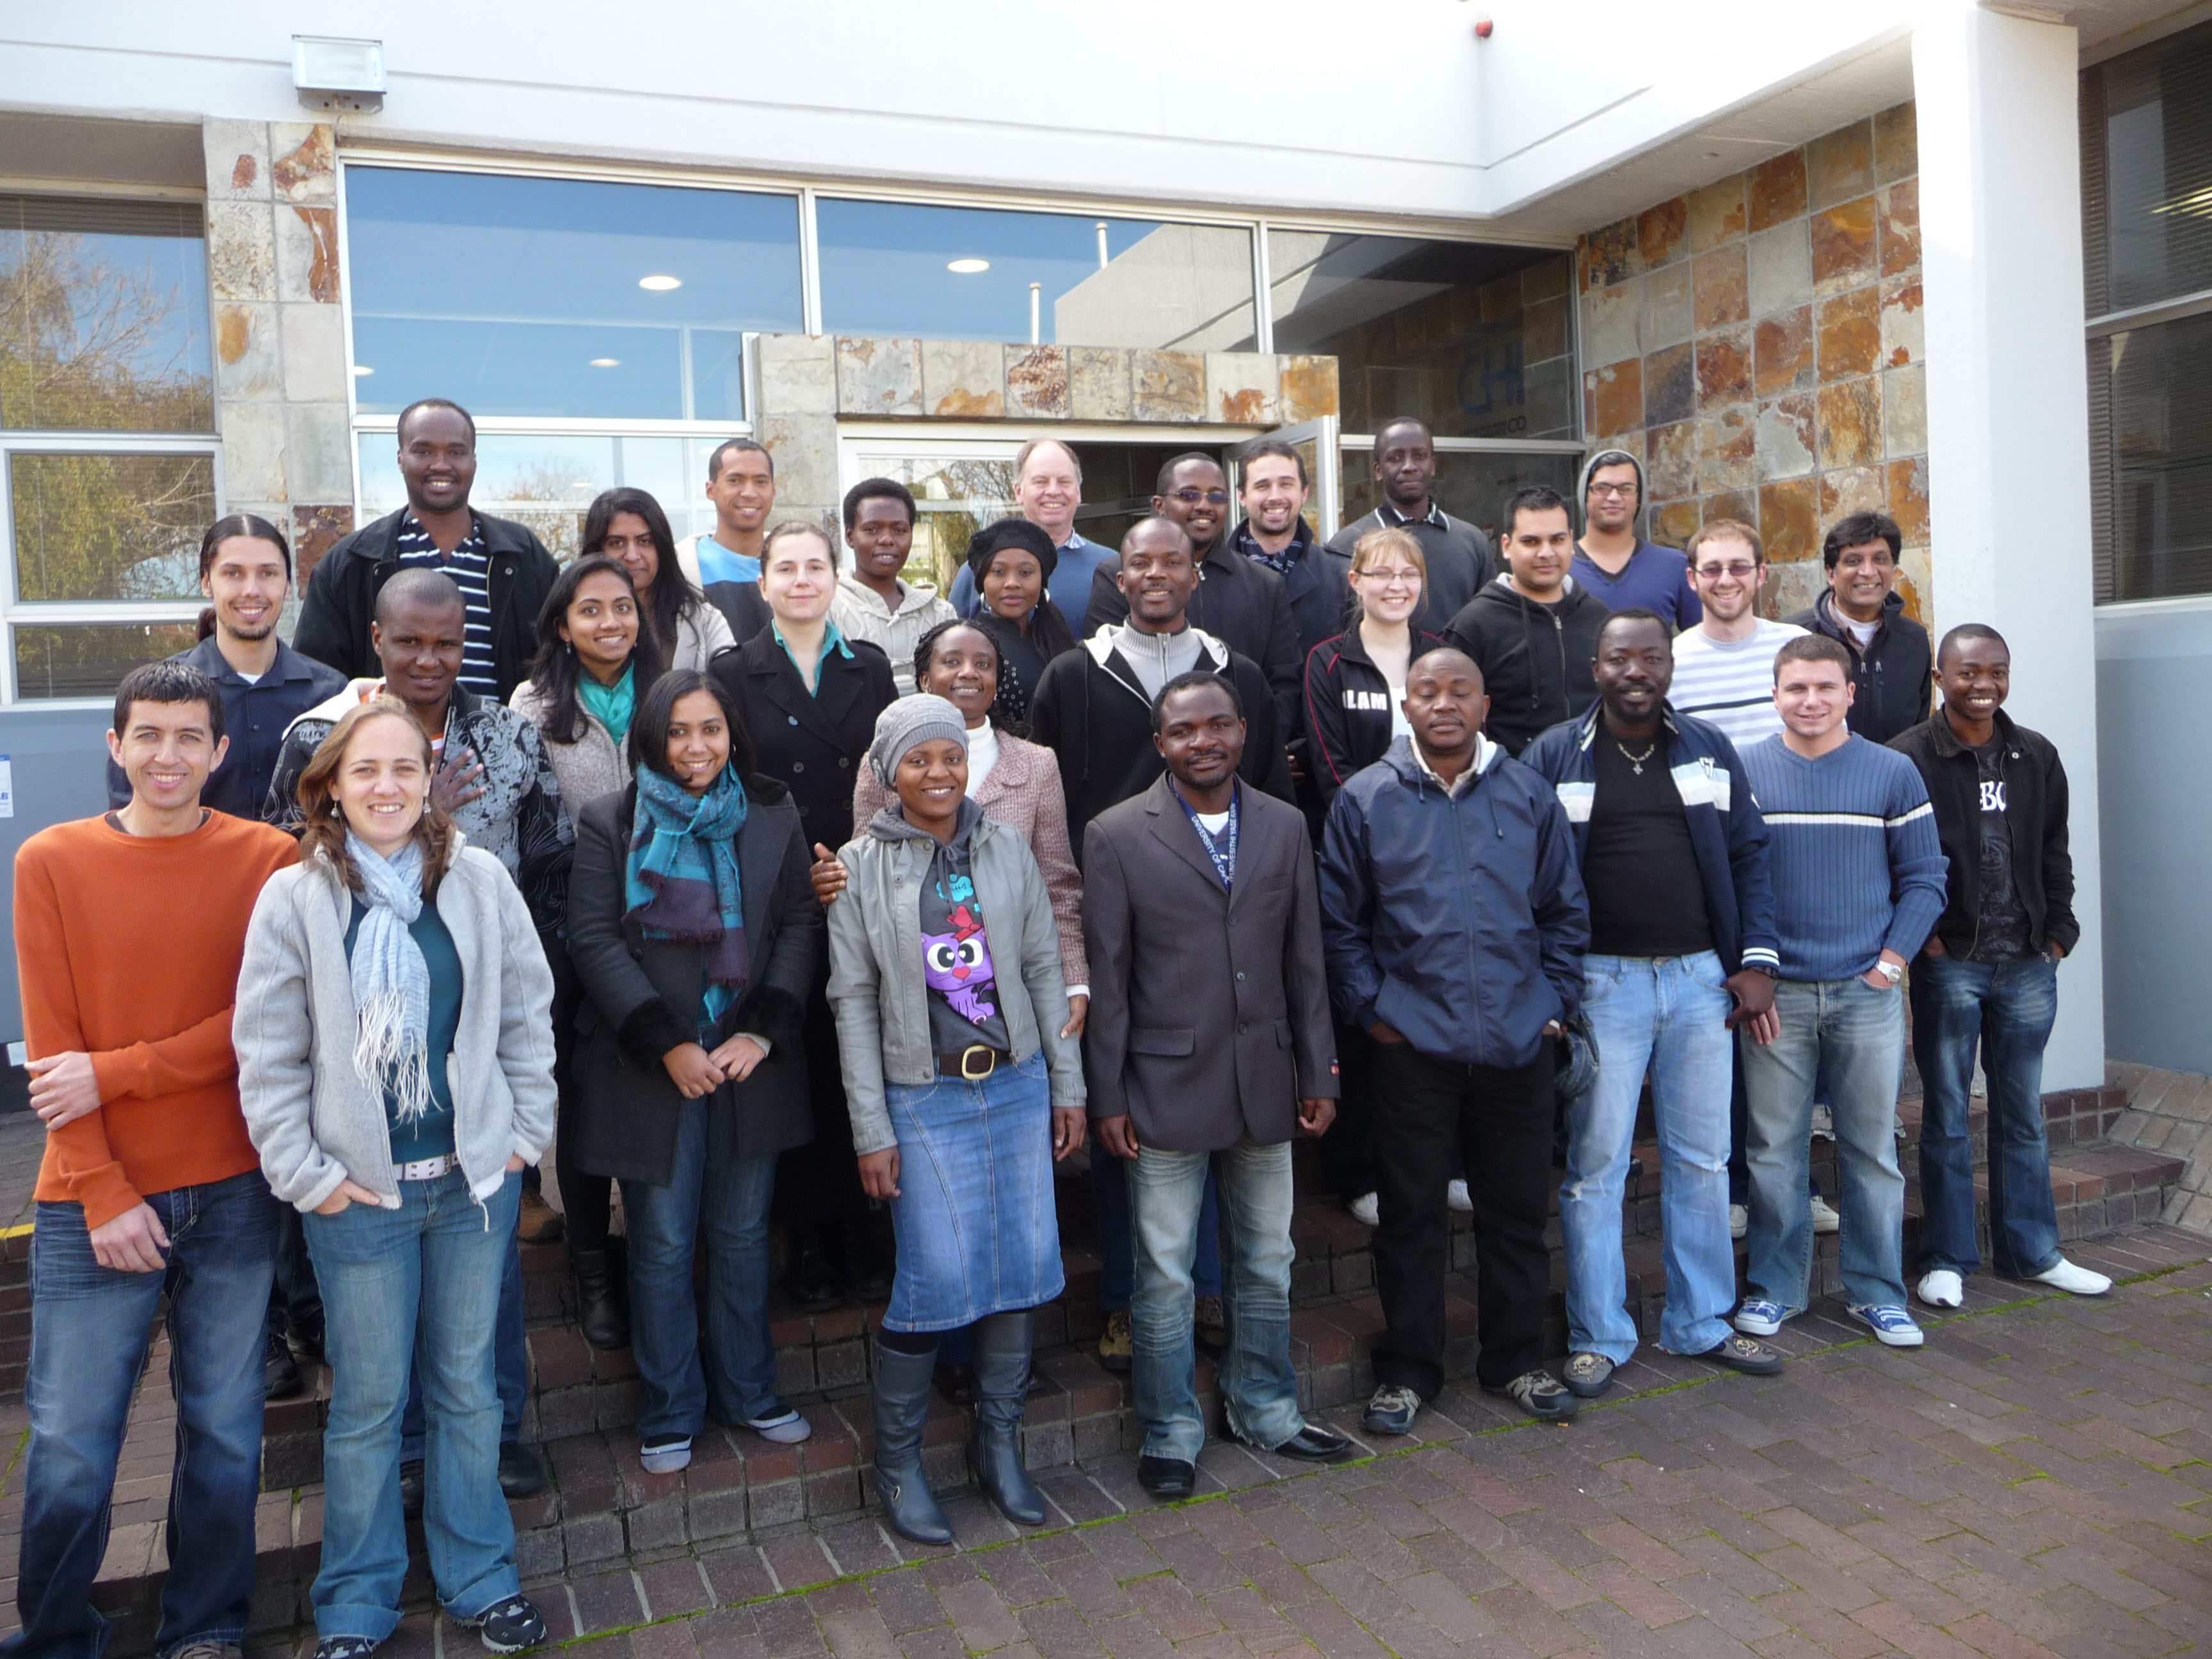 Sewell with students from Molecular Dynamics course